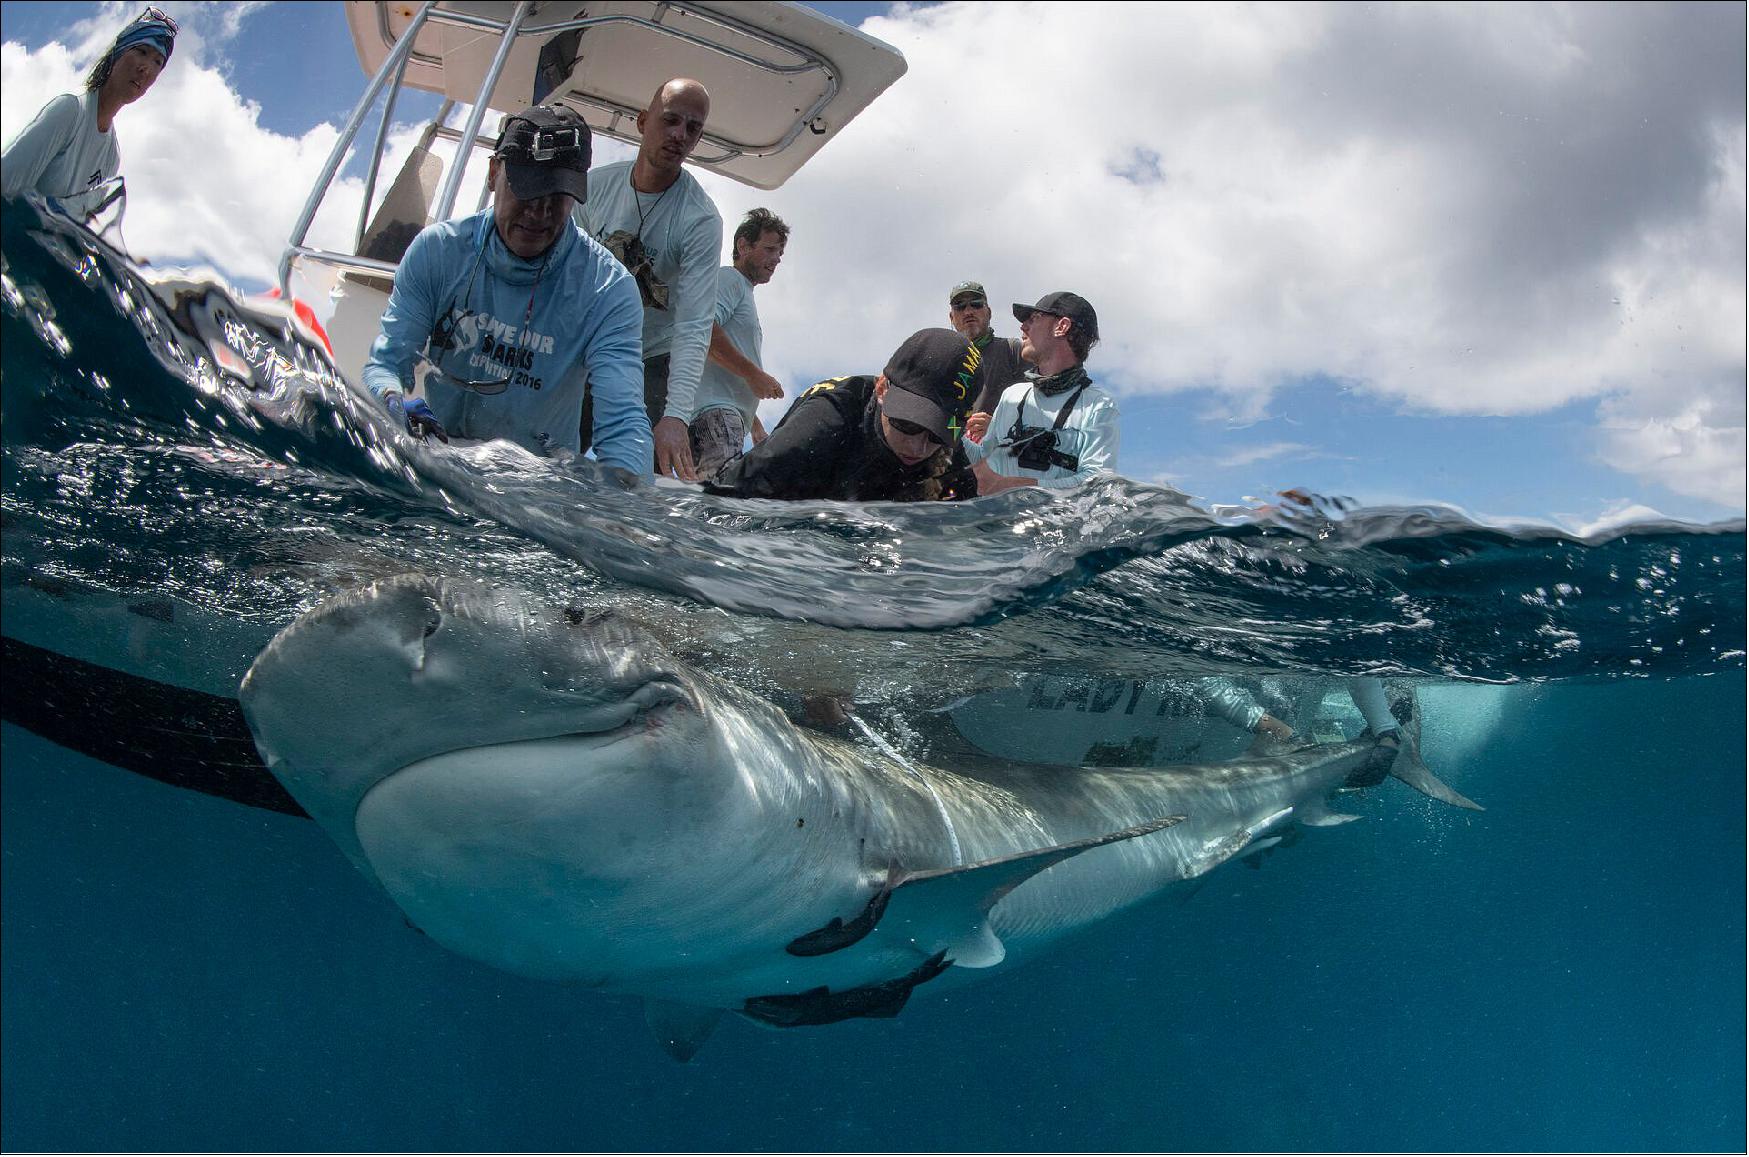 Figure 6: Tiger shark being captured by the tagging team (image credit: ESA)